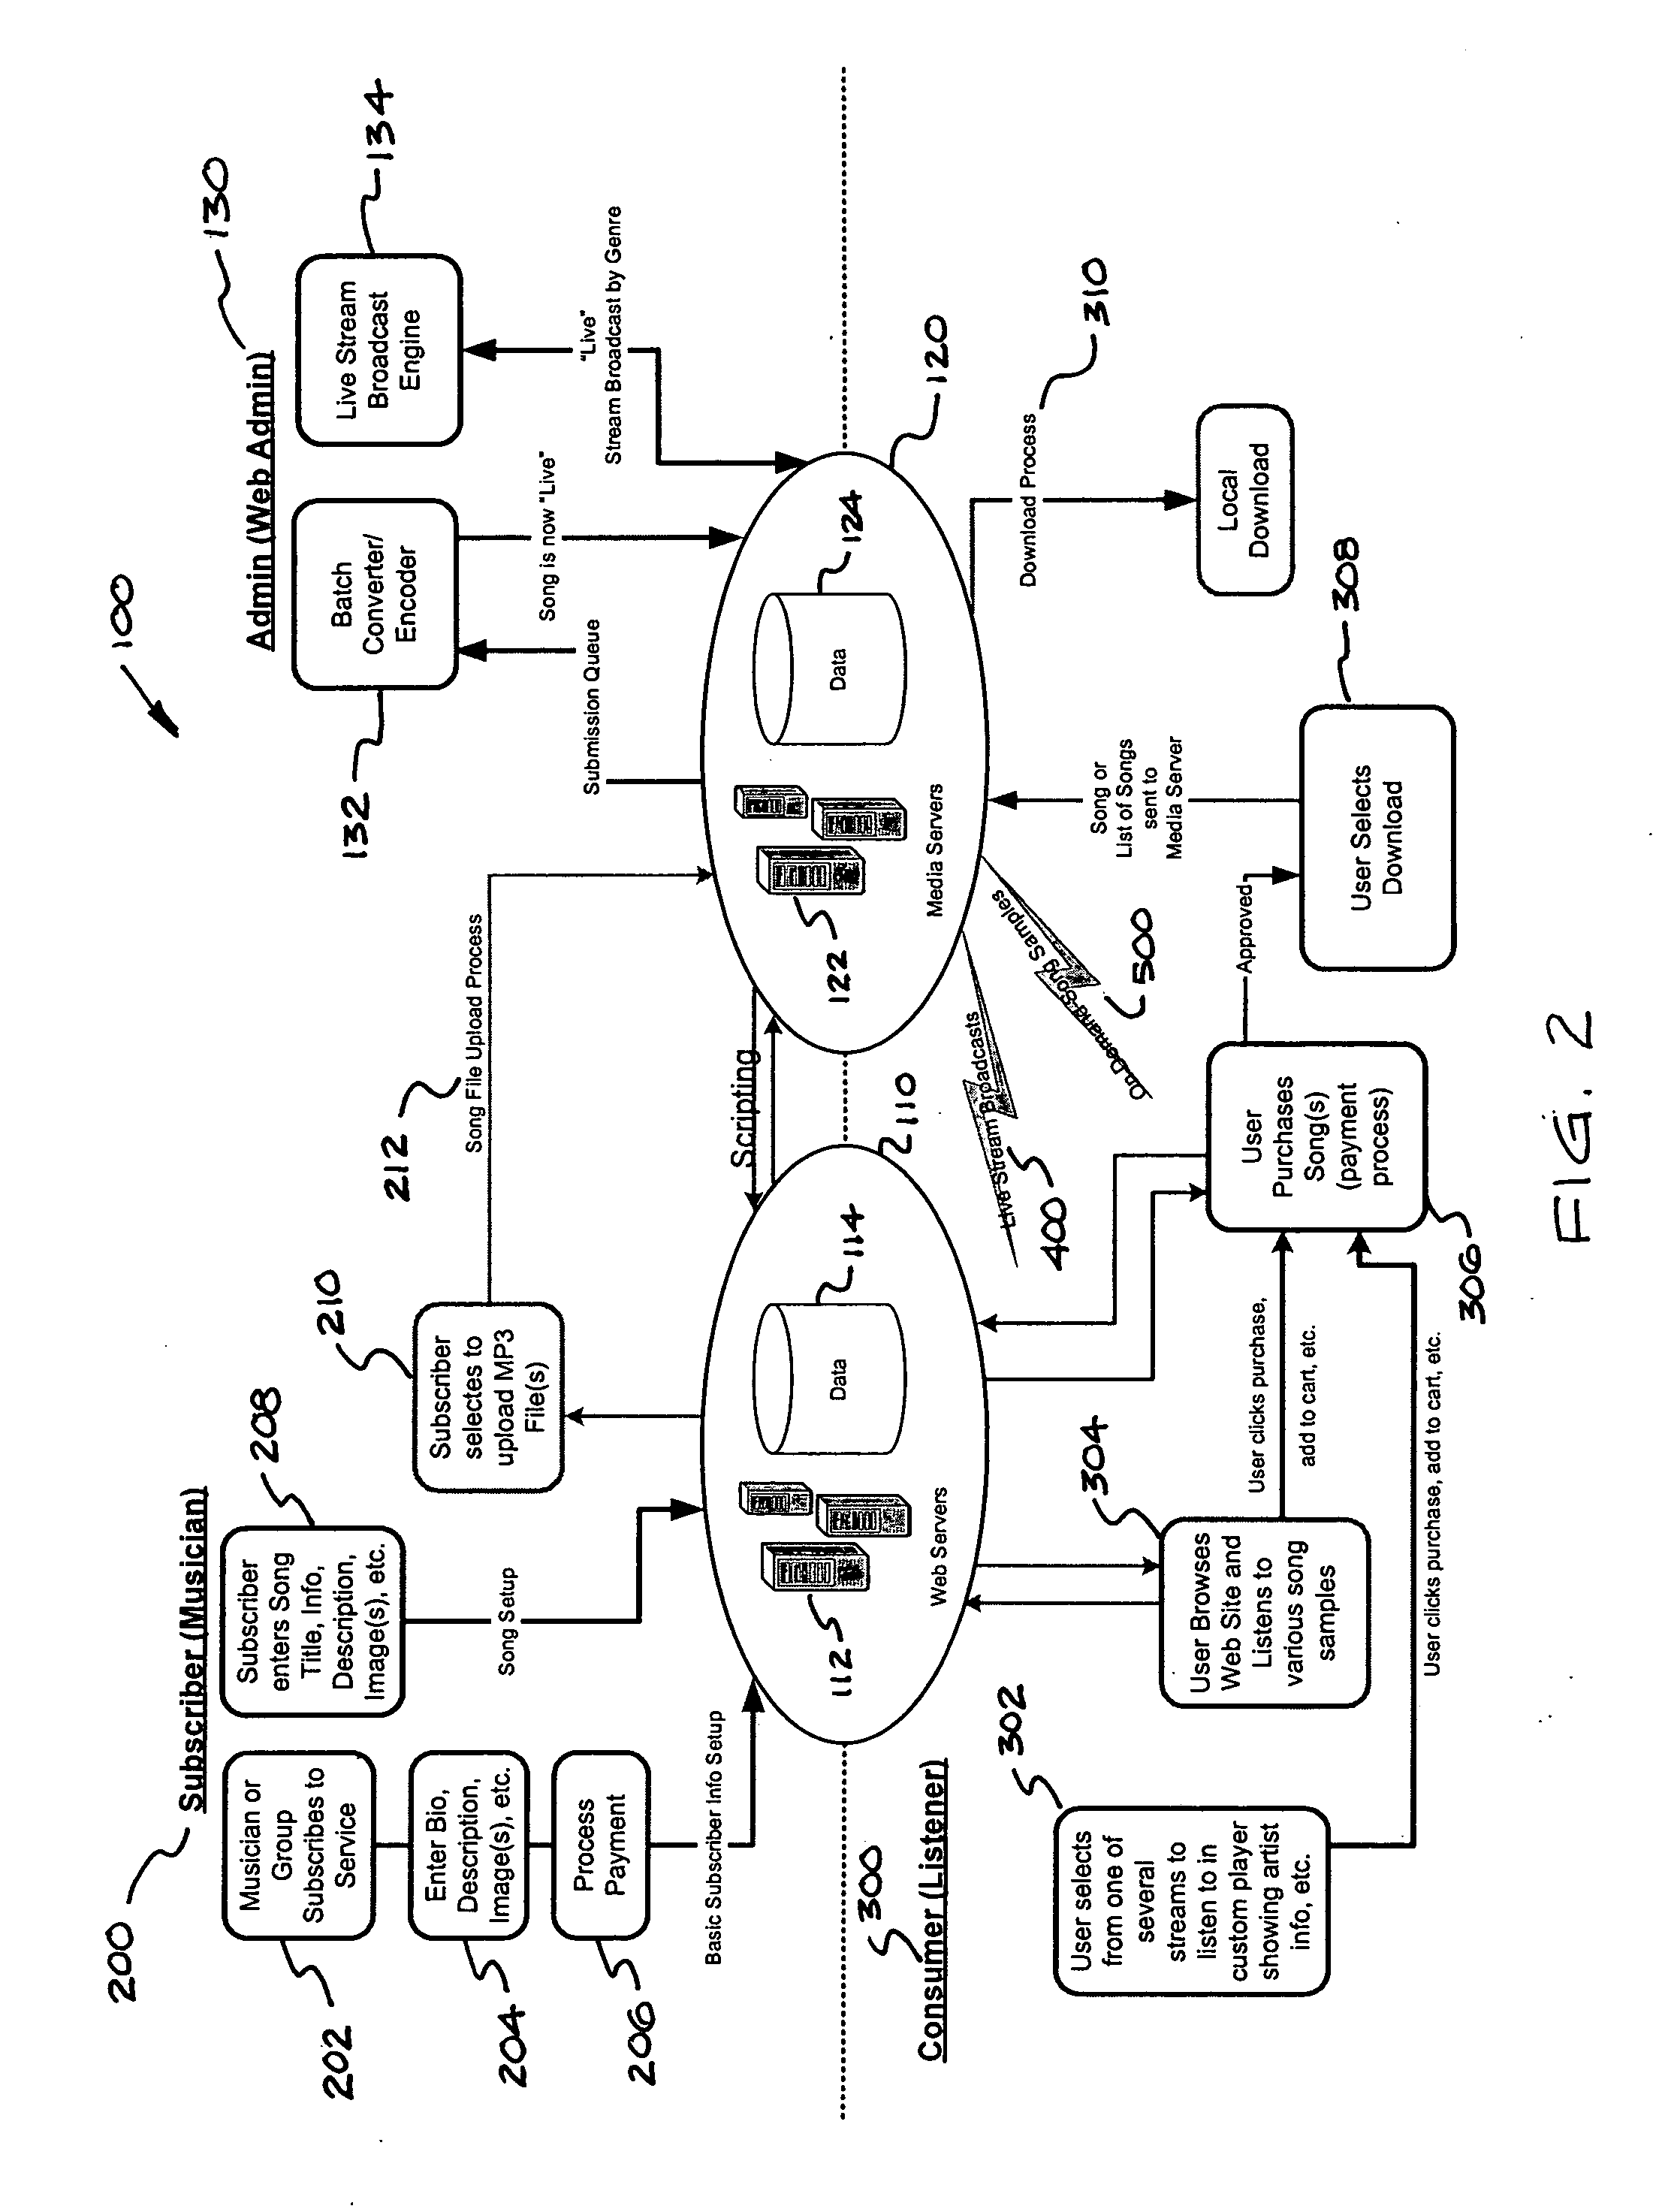 Electronic media distribution system and method